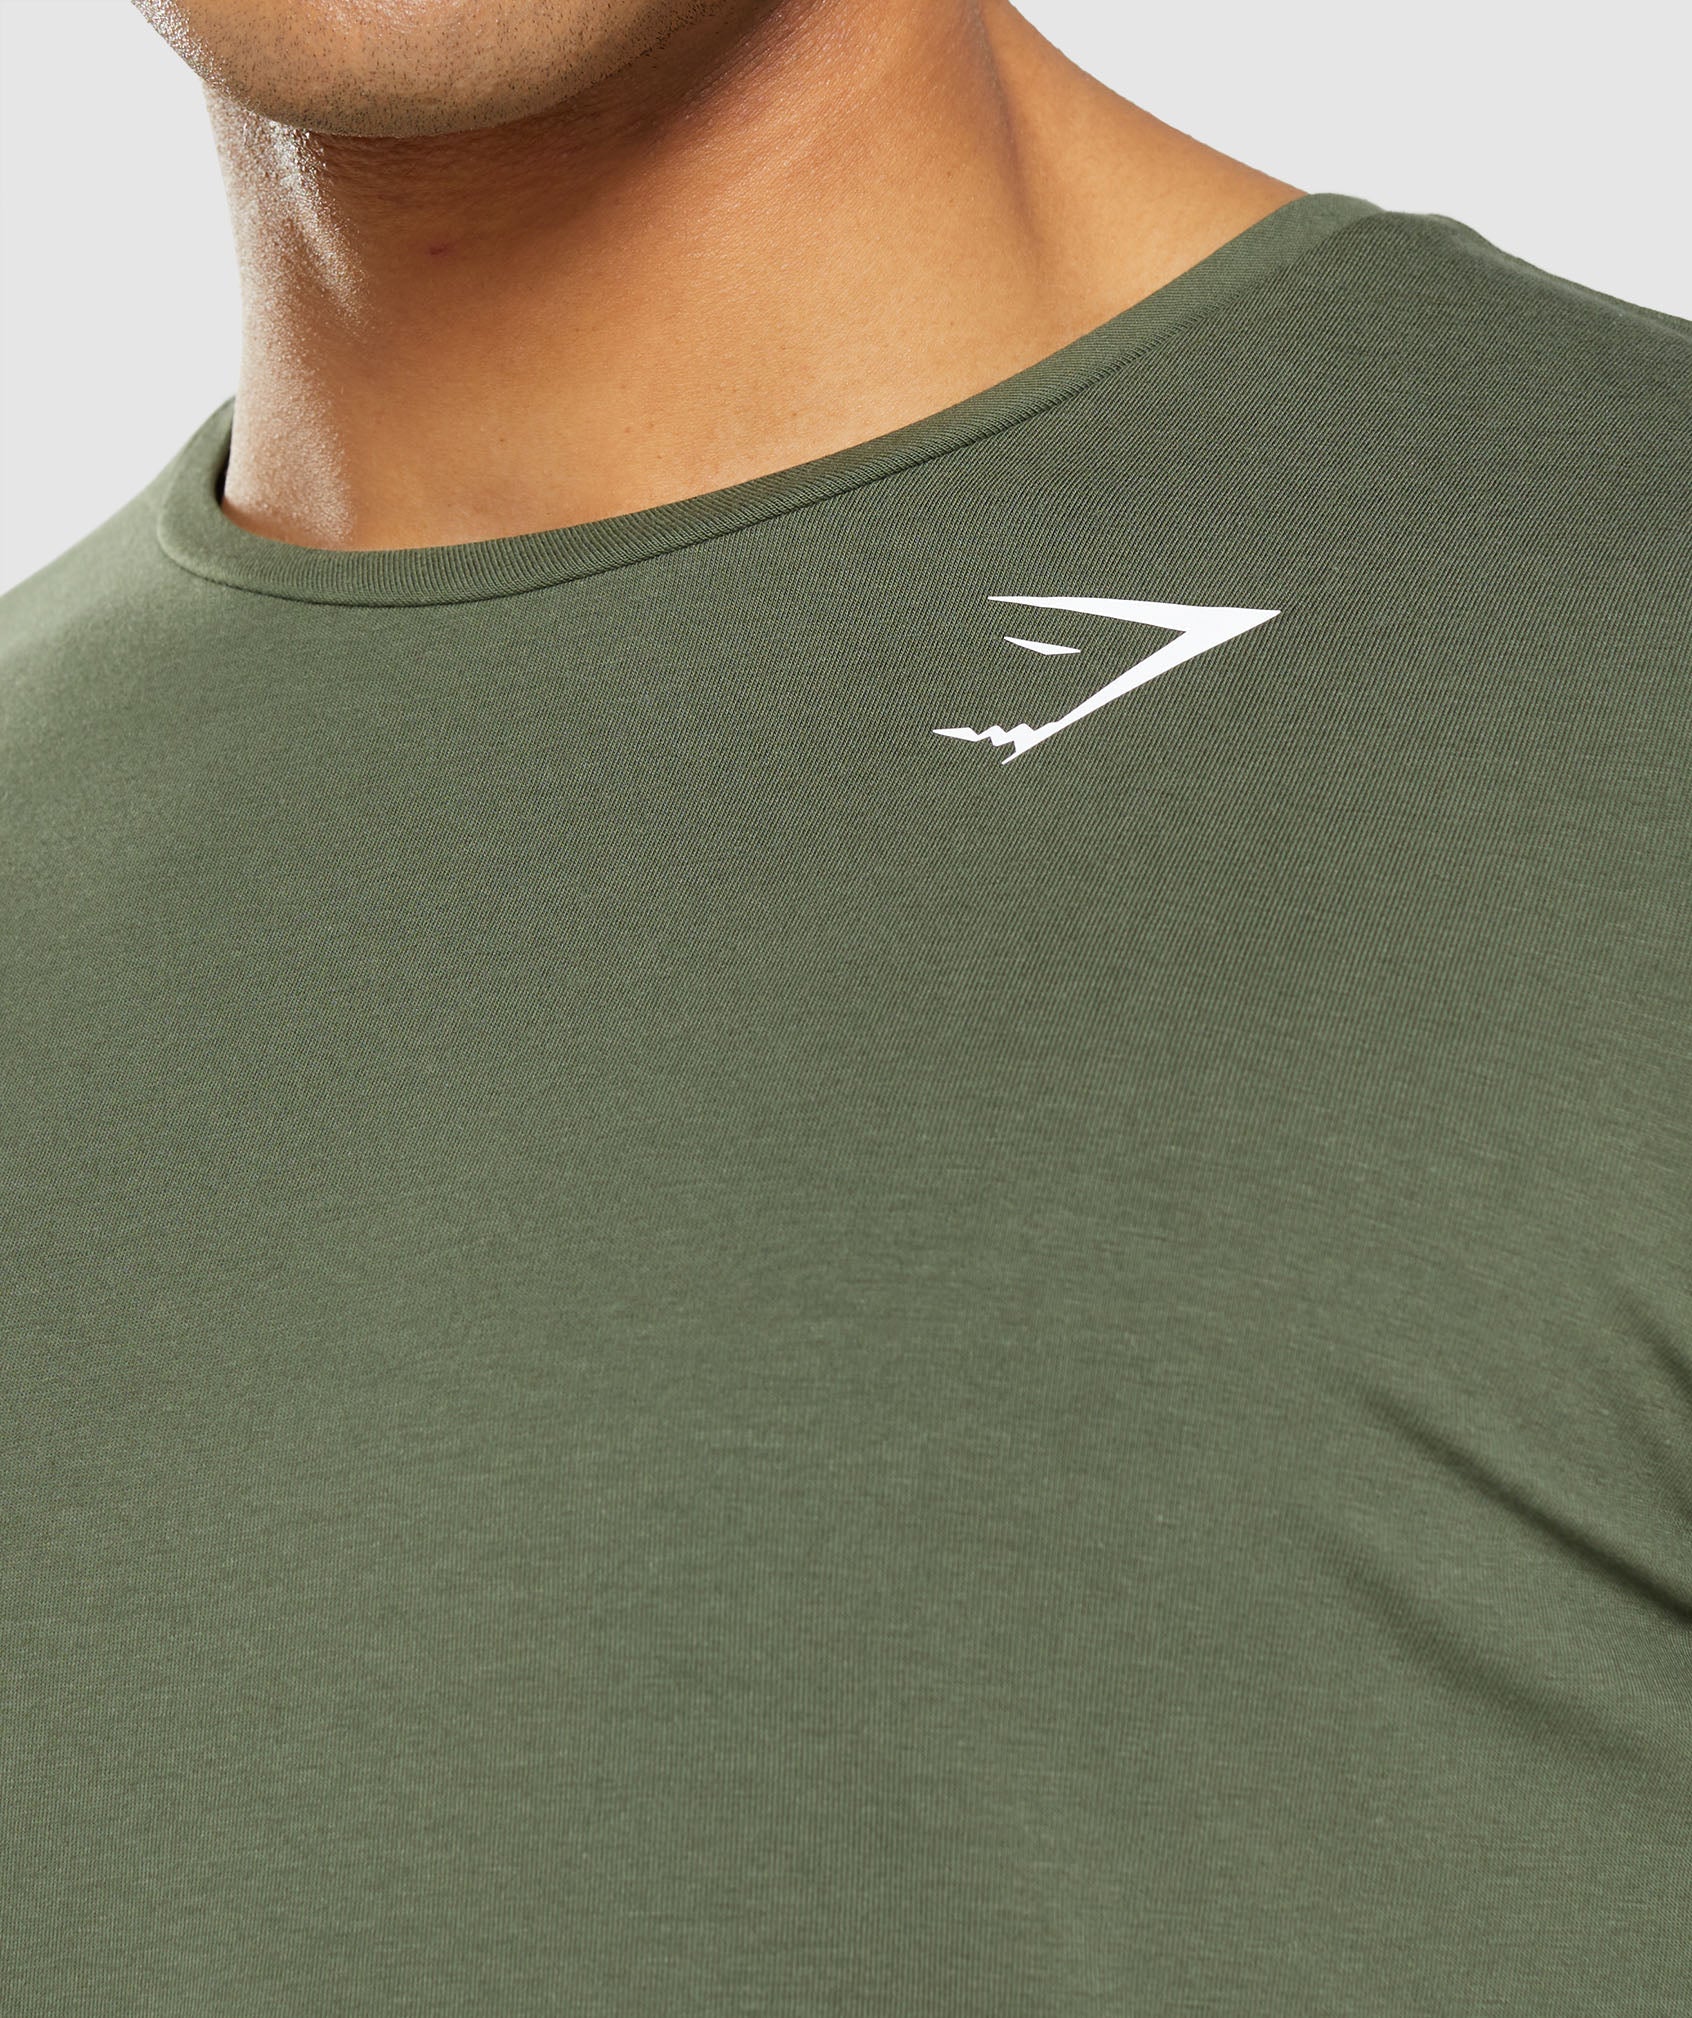 Essential T-Shirt in Core Olive